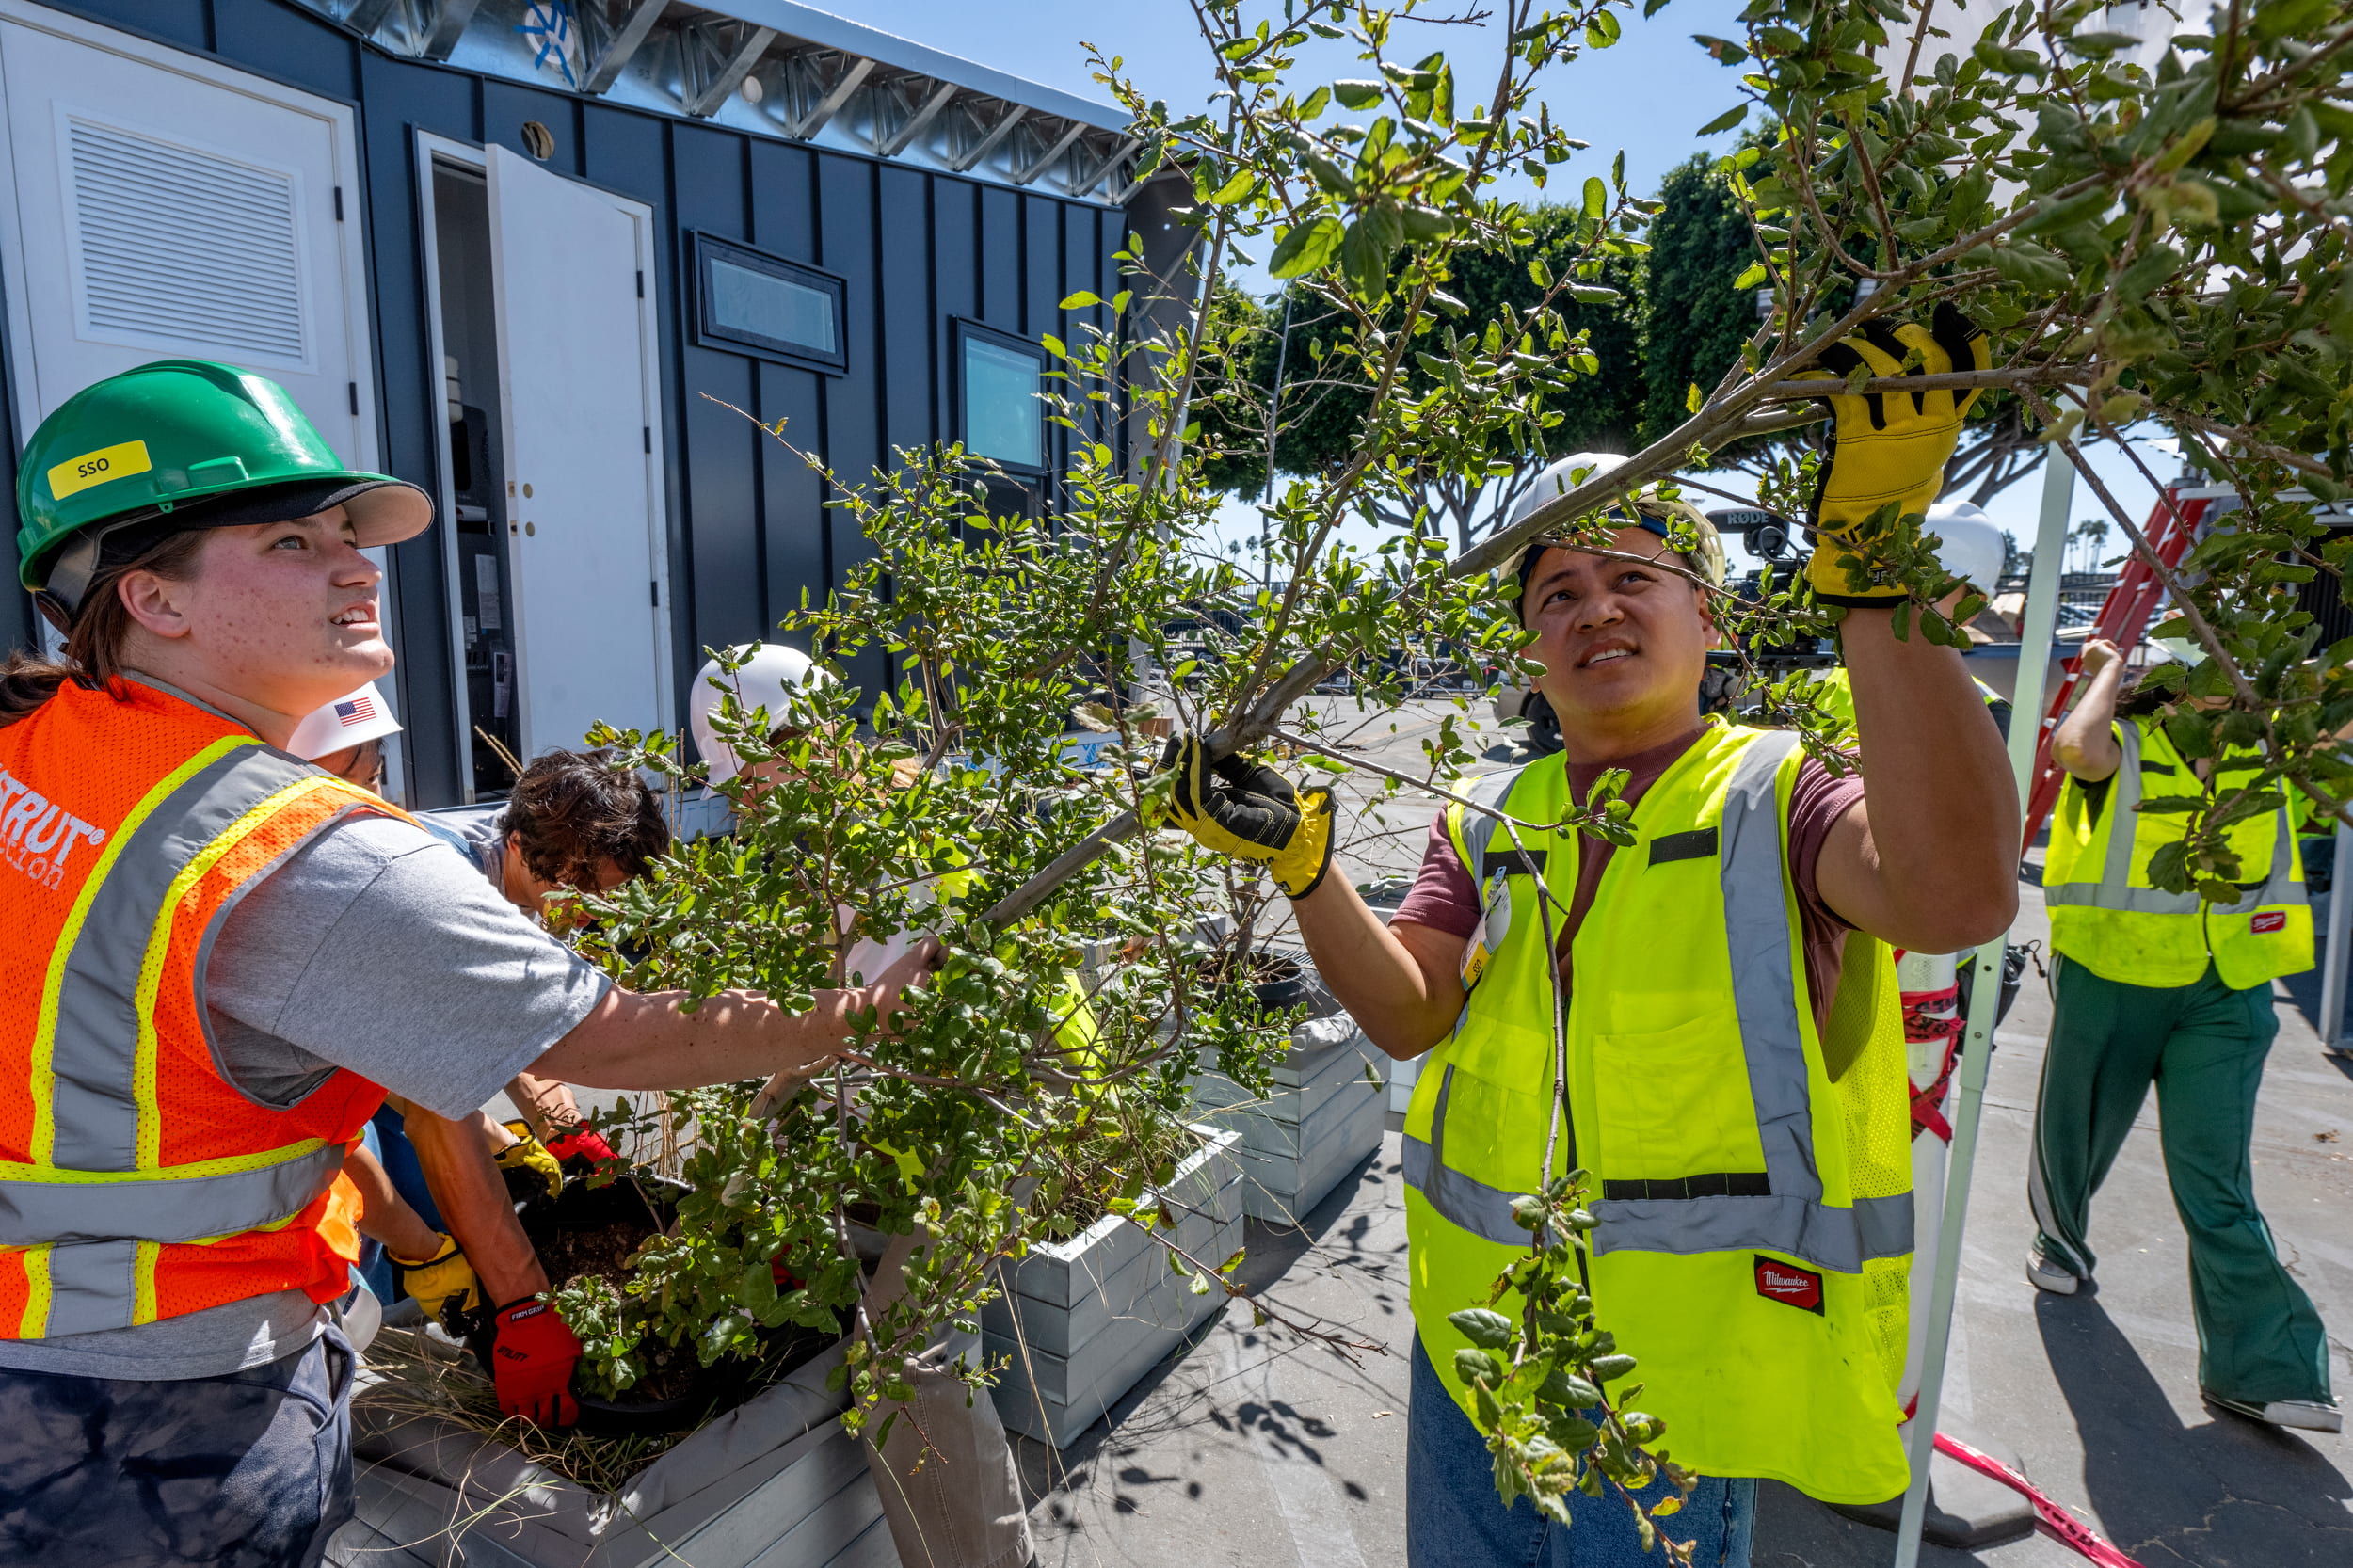 Workers in hard hats and yellow vests move a tree into position outside of a model home.